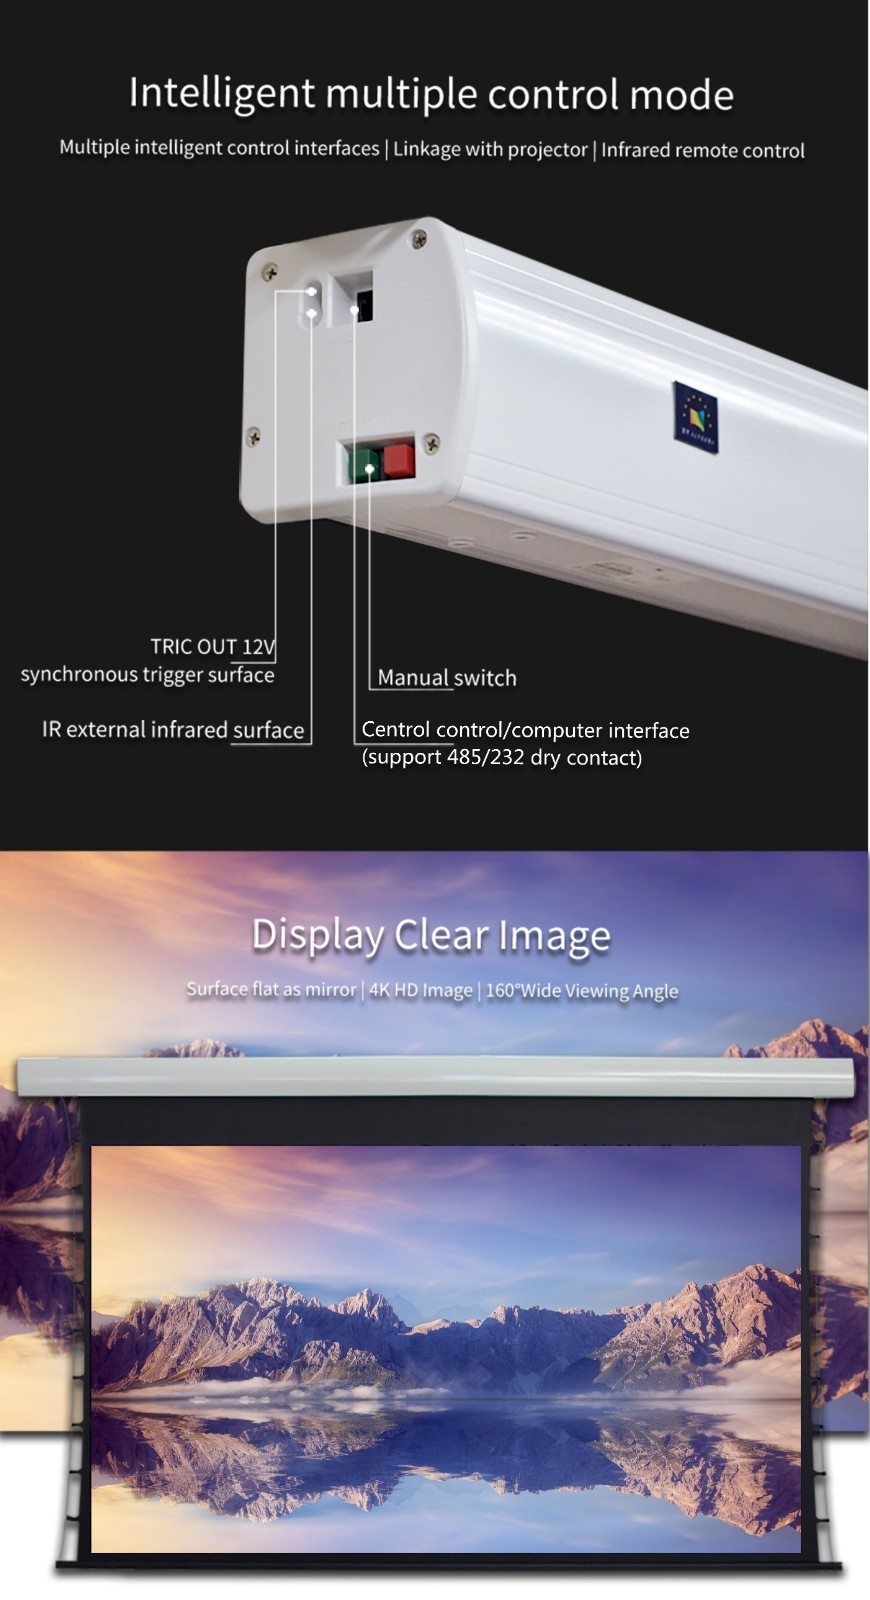 XY Screens motorised projector screen factory price for home